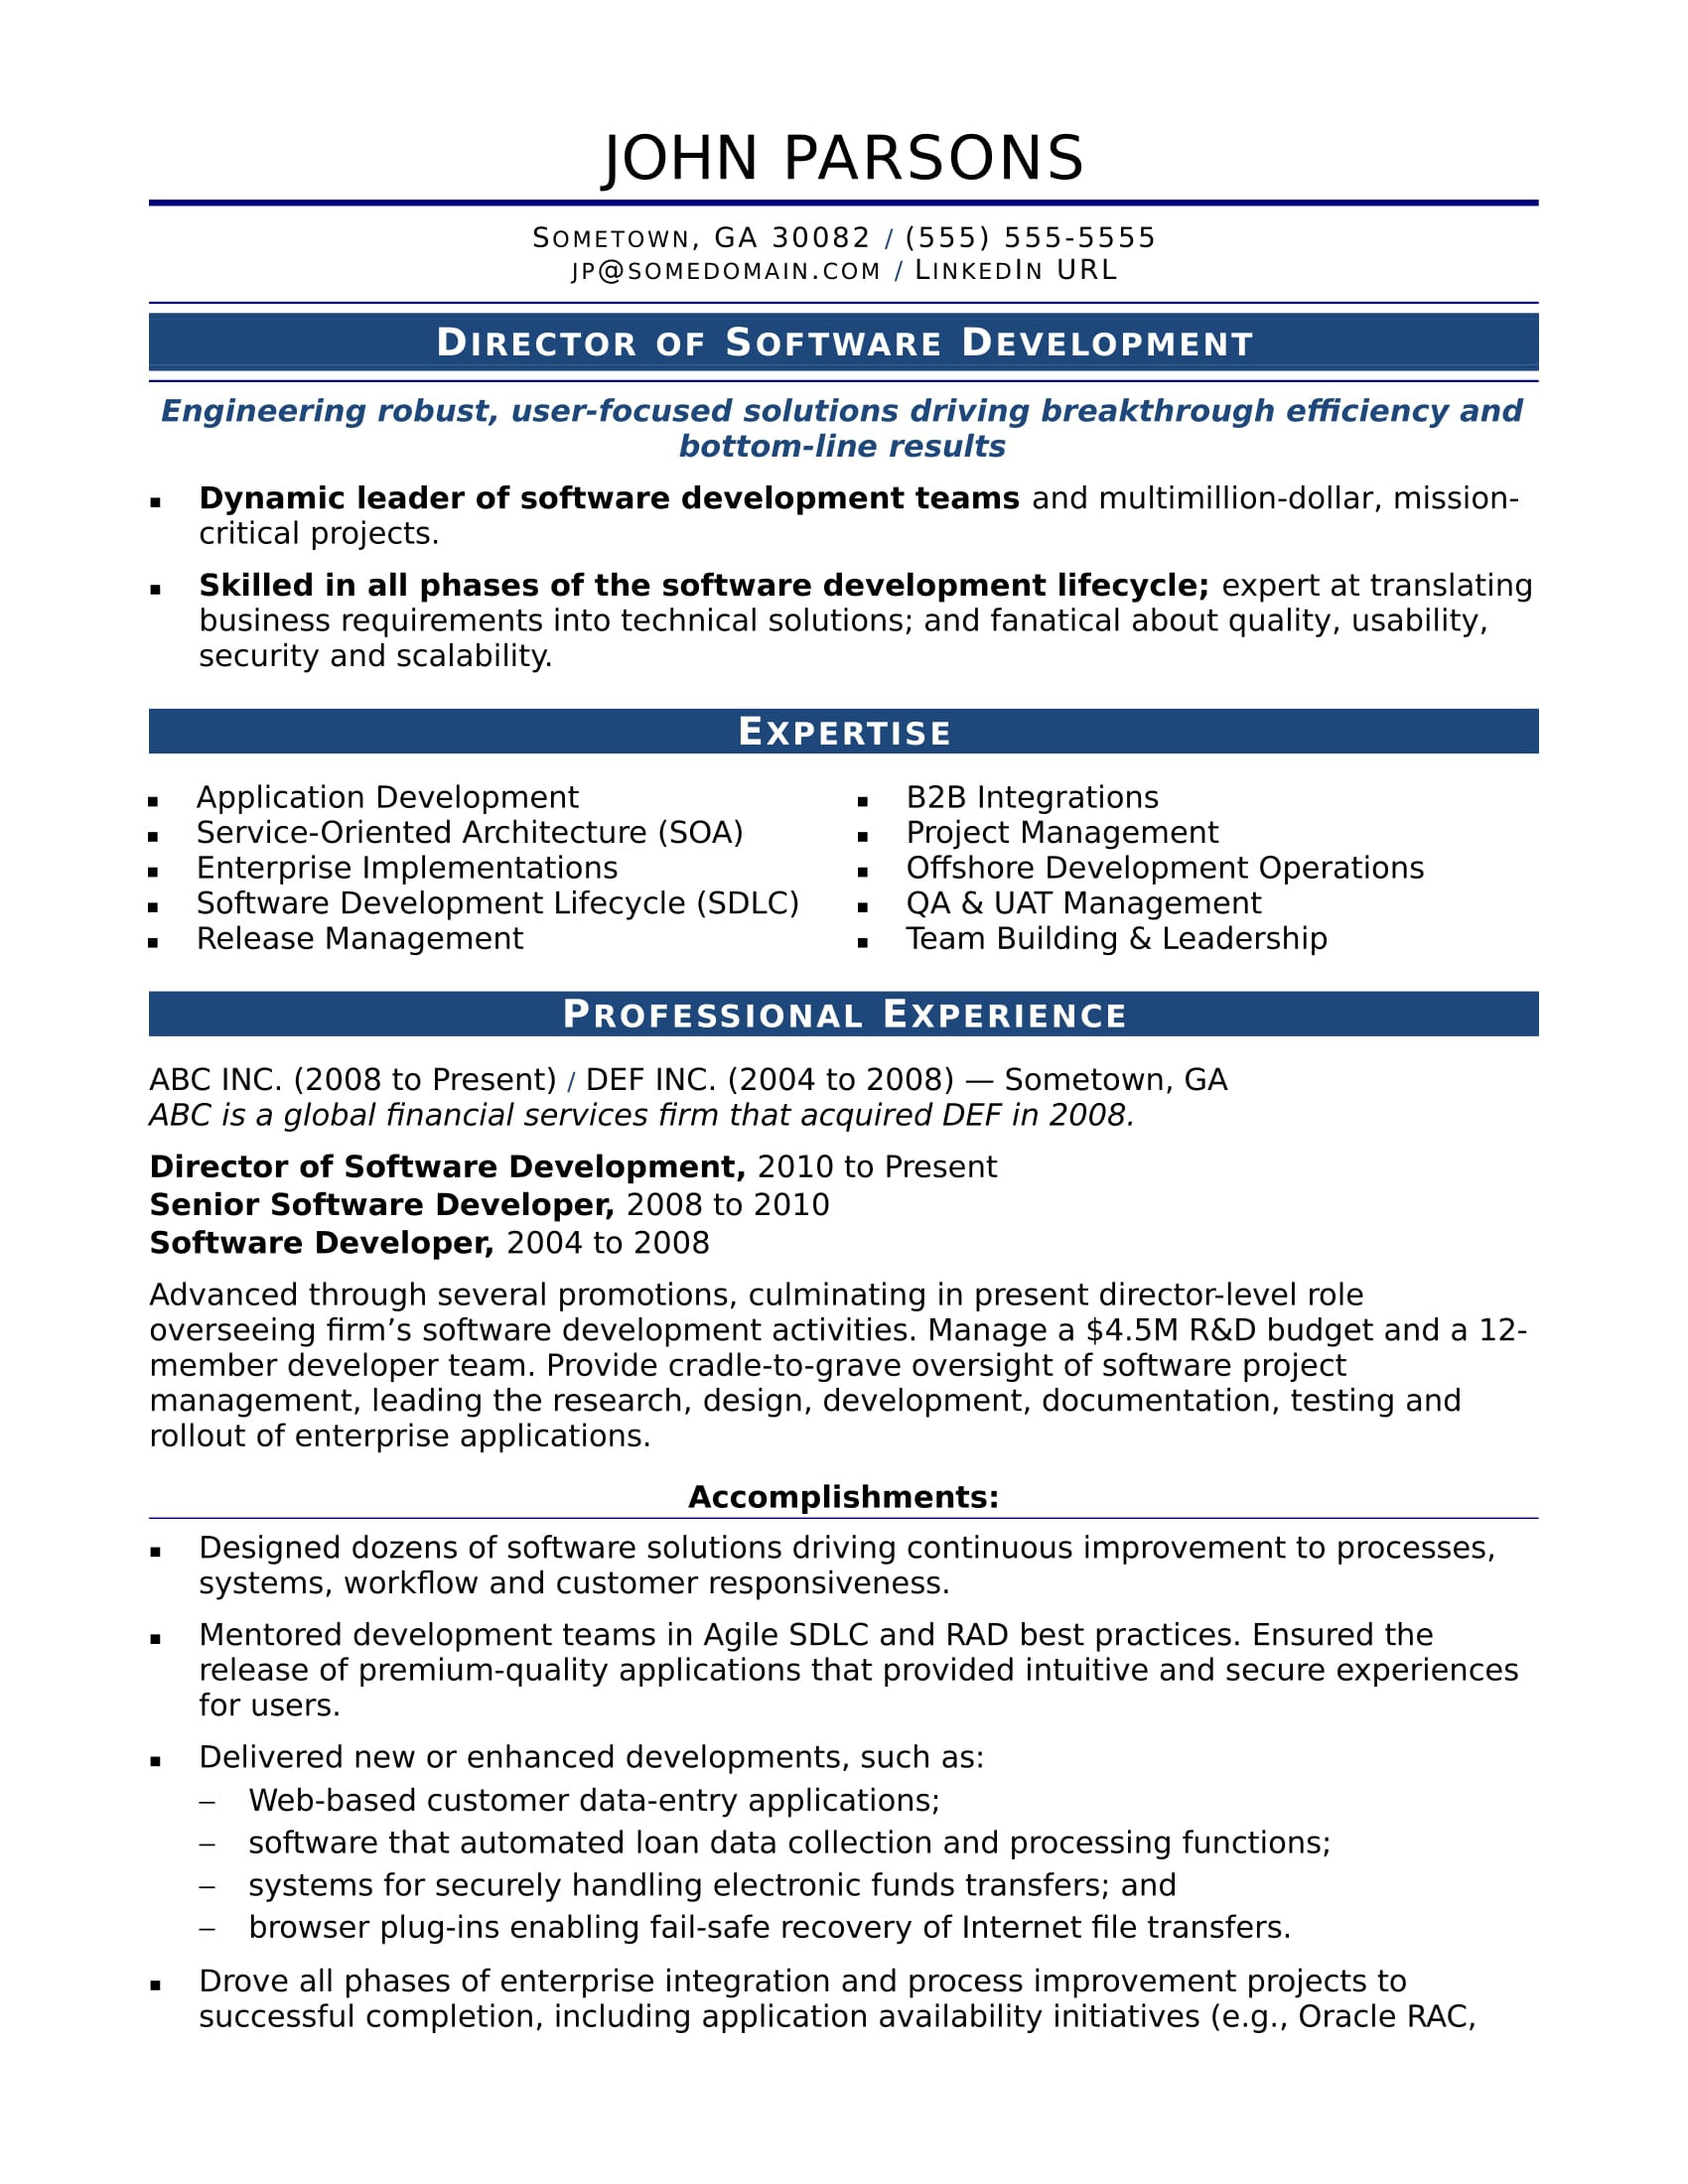 Sample Resume after 1 Year Experience Sample Resume for An Experienced It Developer Monster.com